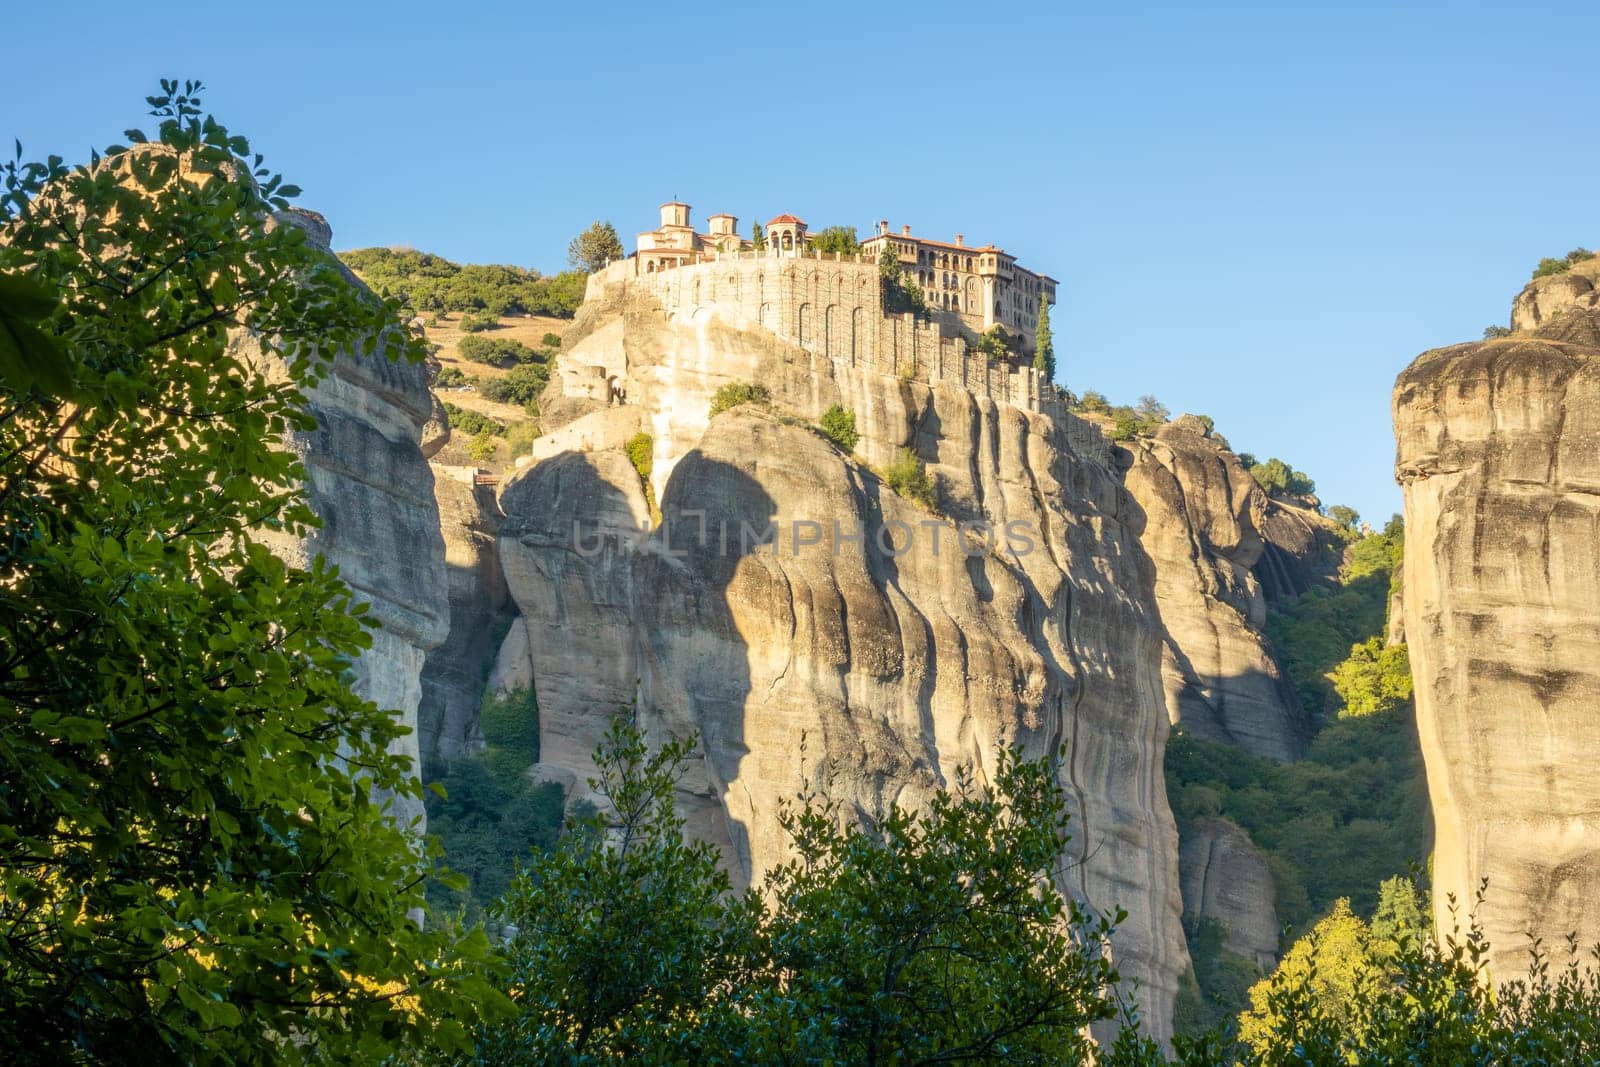 Greece. Sunny summer day in Meteora. Large rock monastery near a green hill against a blue sky